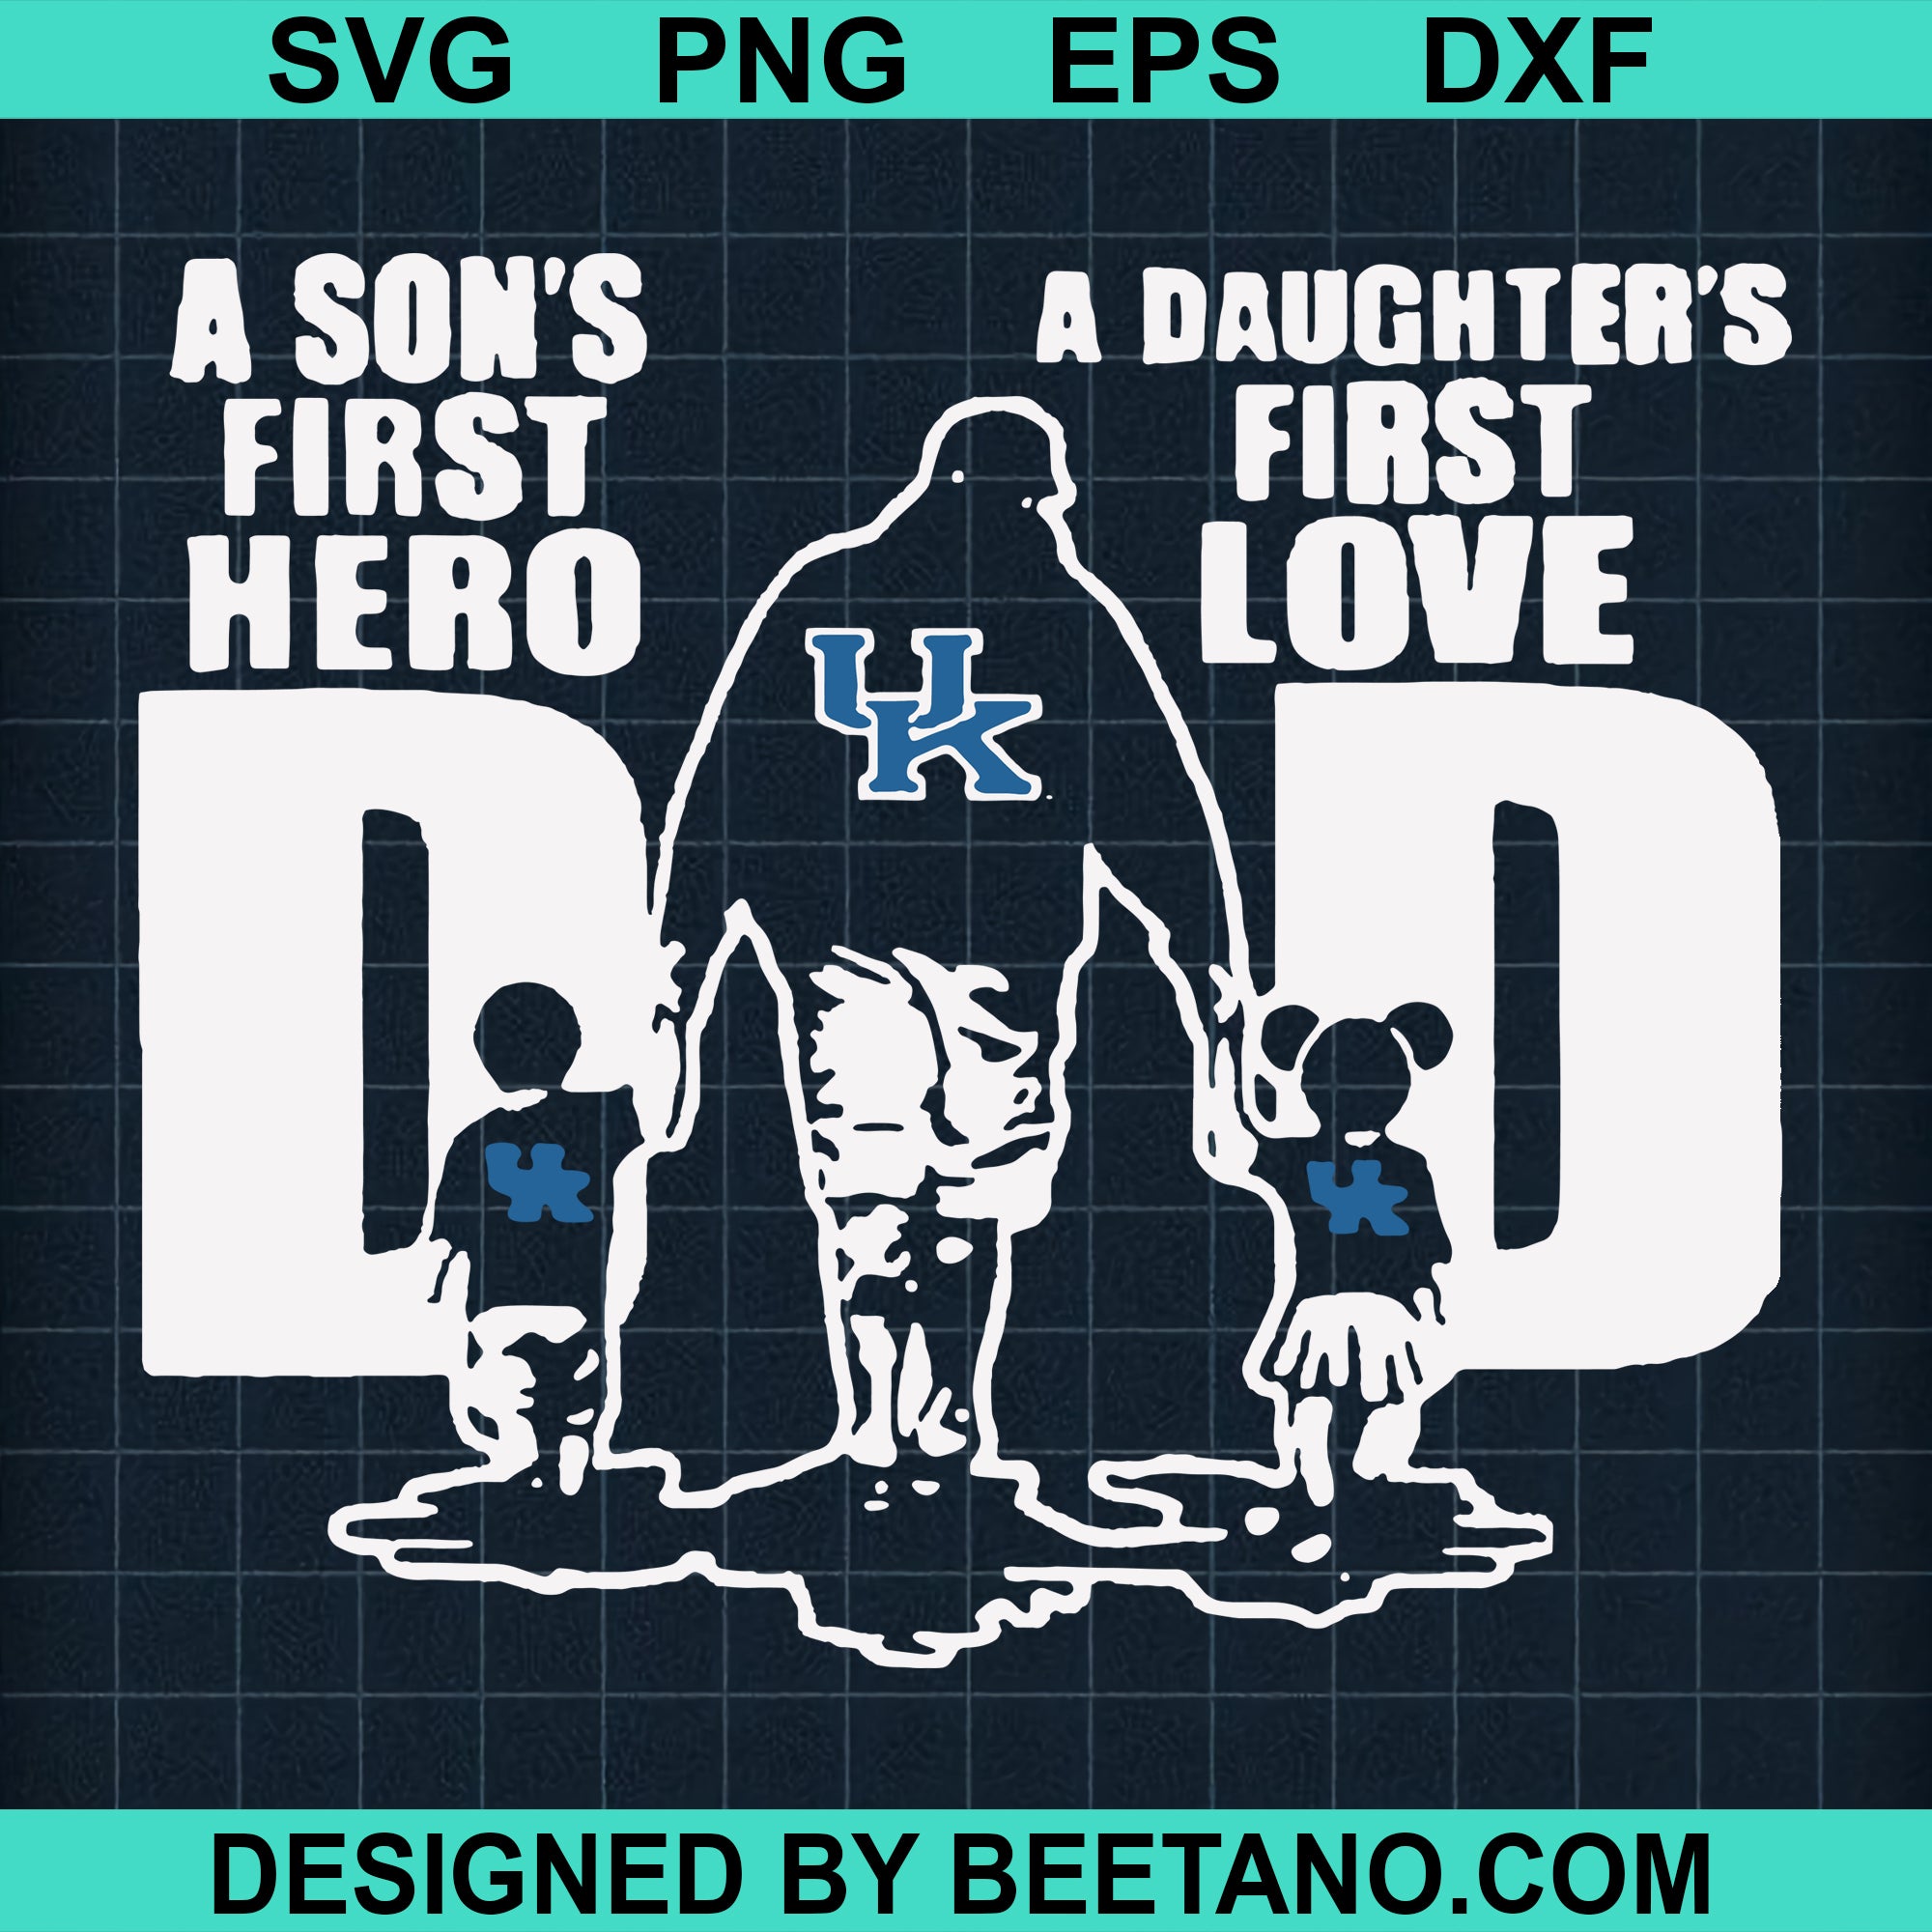 Download A Son S First Hero A Daughter S First Love Svg Father S Day High Quality Svg Cut Files Best For Handmade Unique Craft